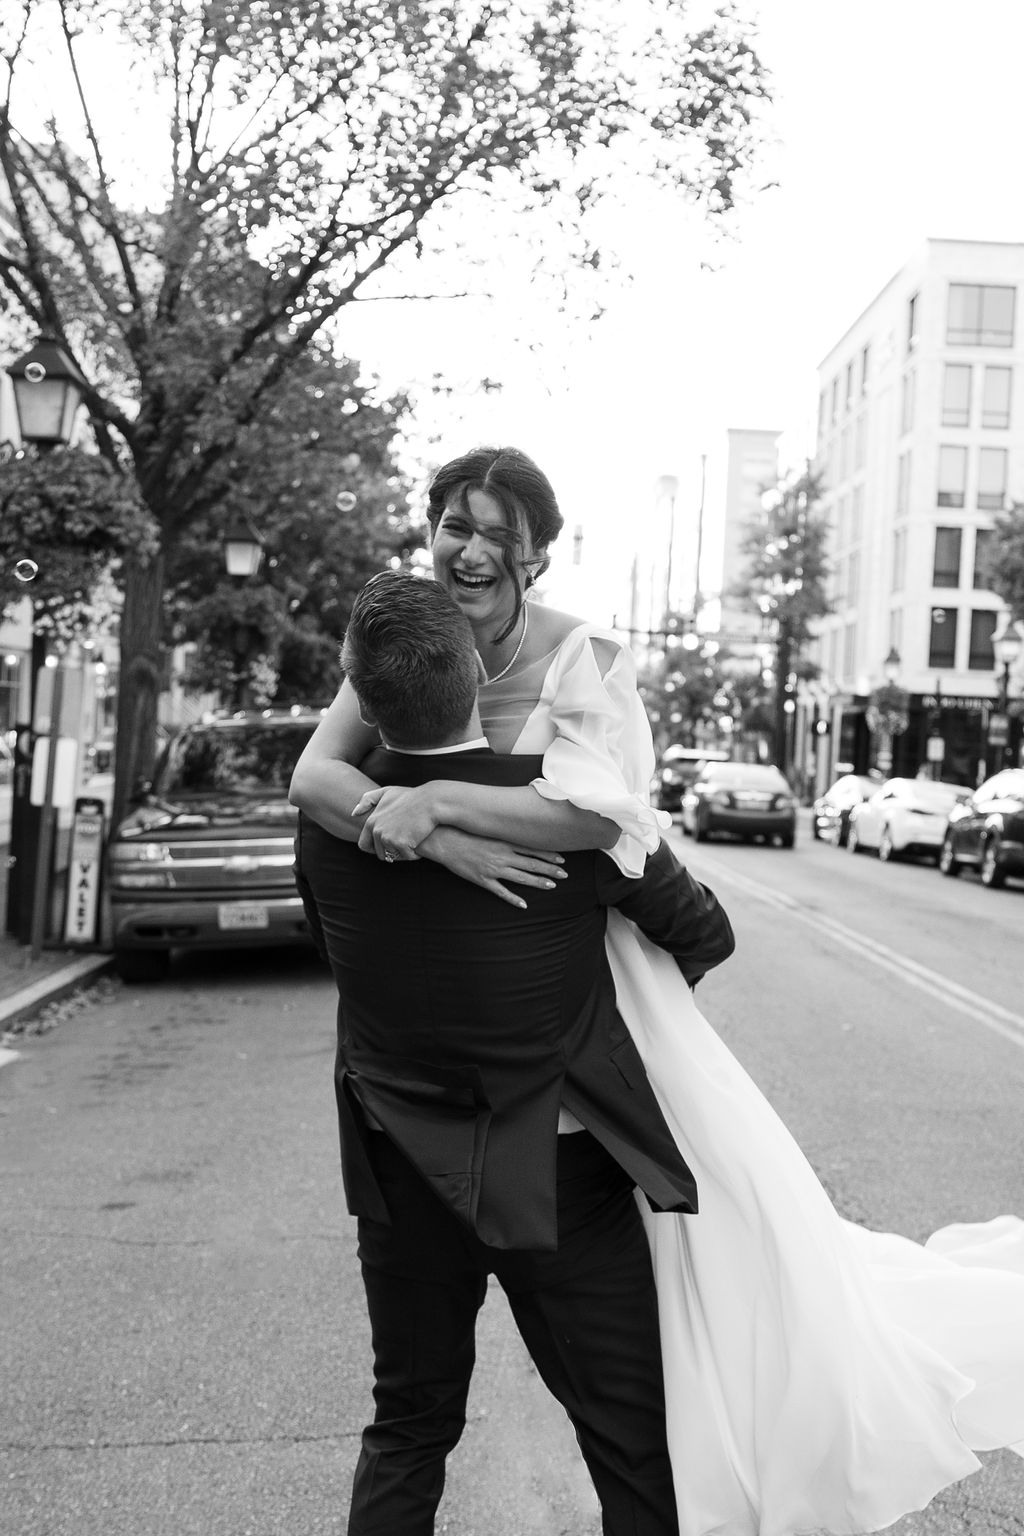 Newlyweds laugh and celebrate as the groom lifts his bride in the street